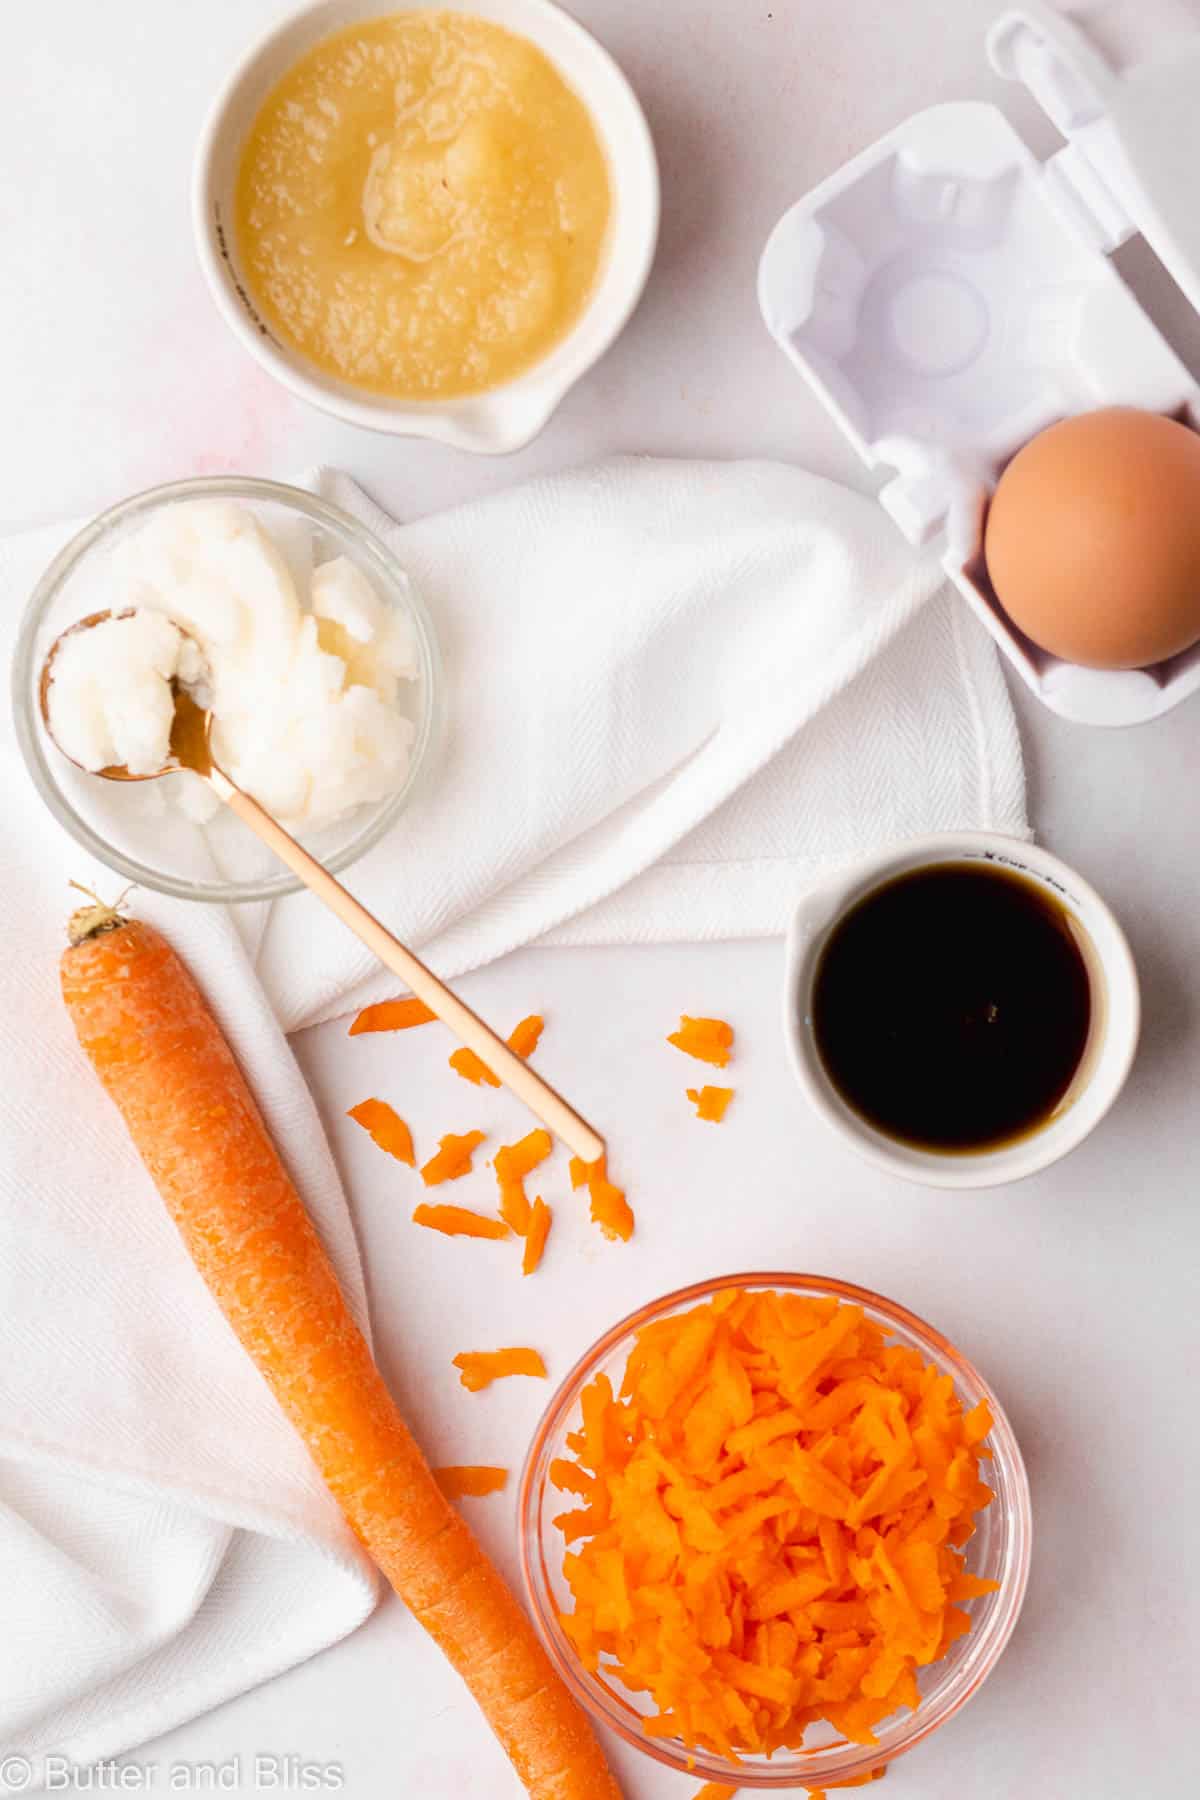 Carrot cake cupcake ingredients on a table